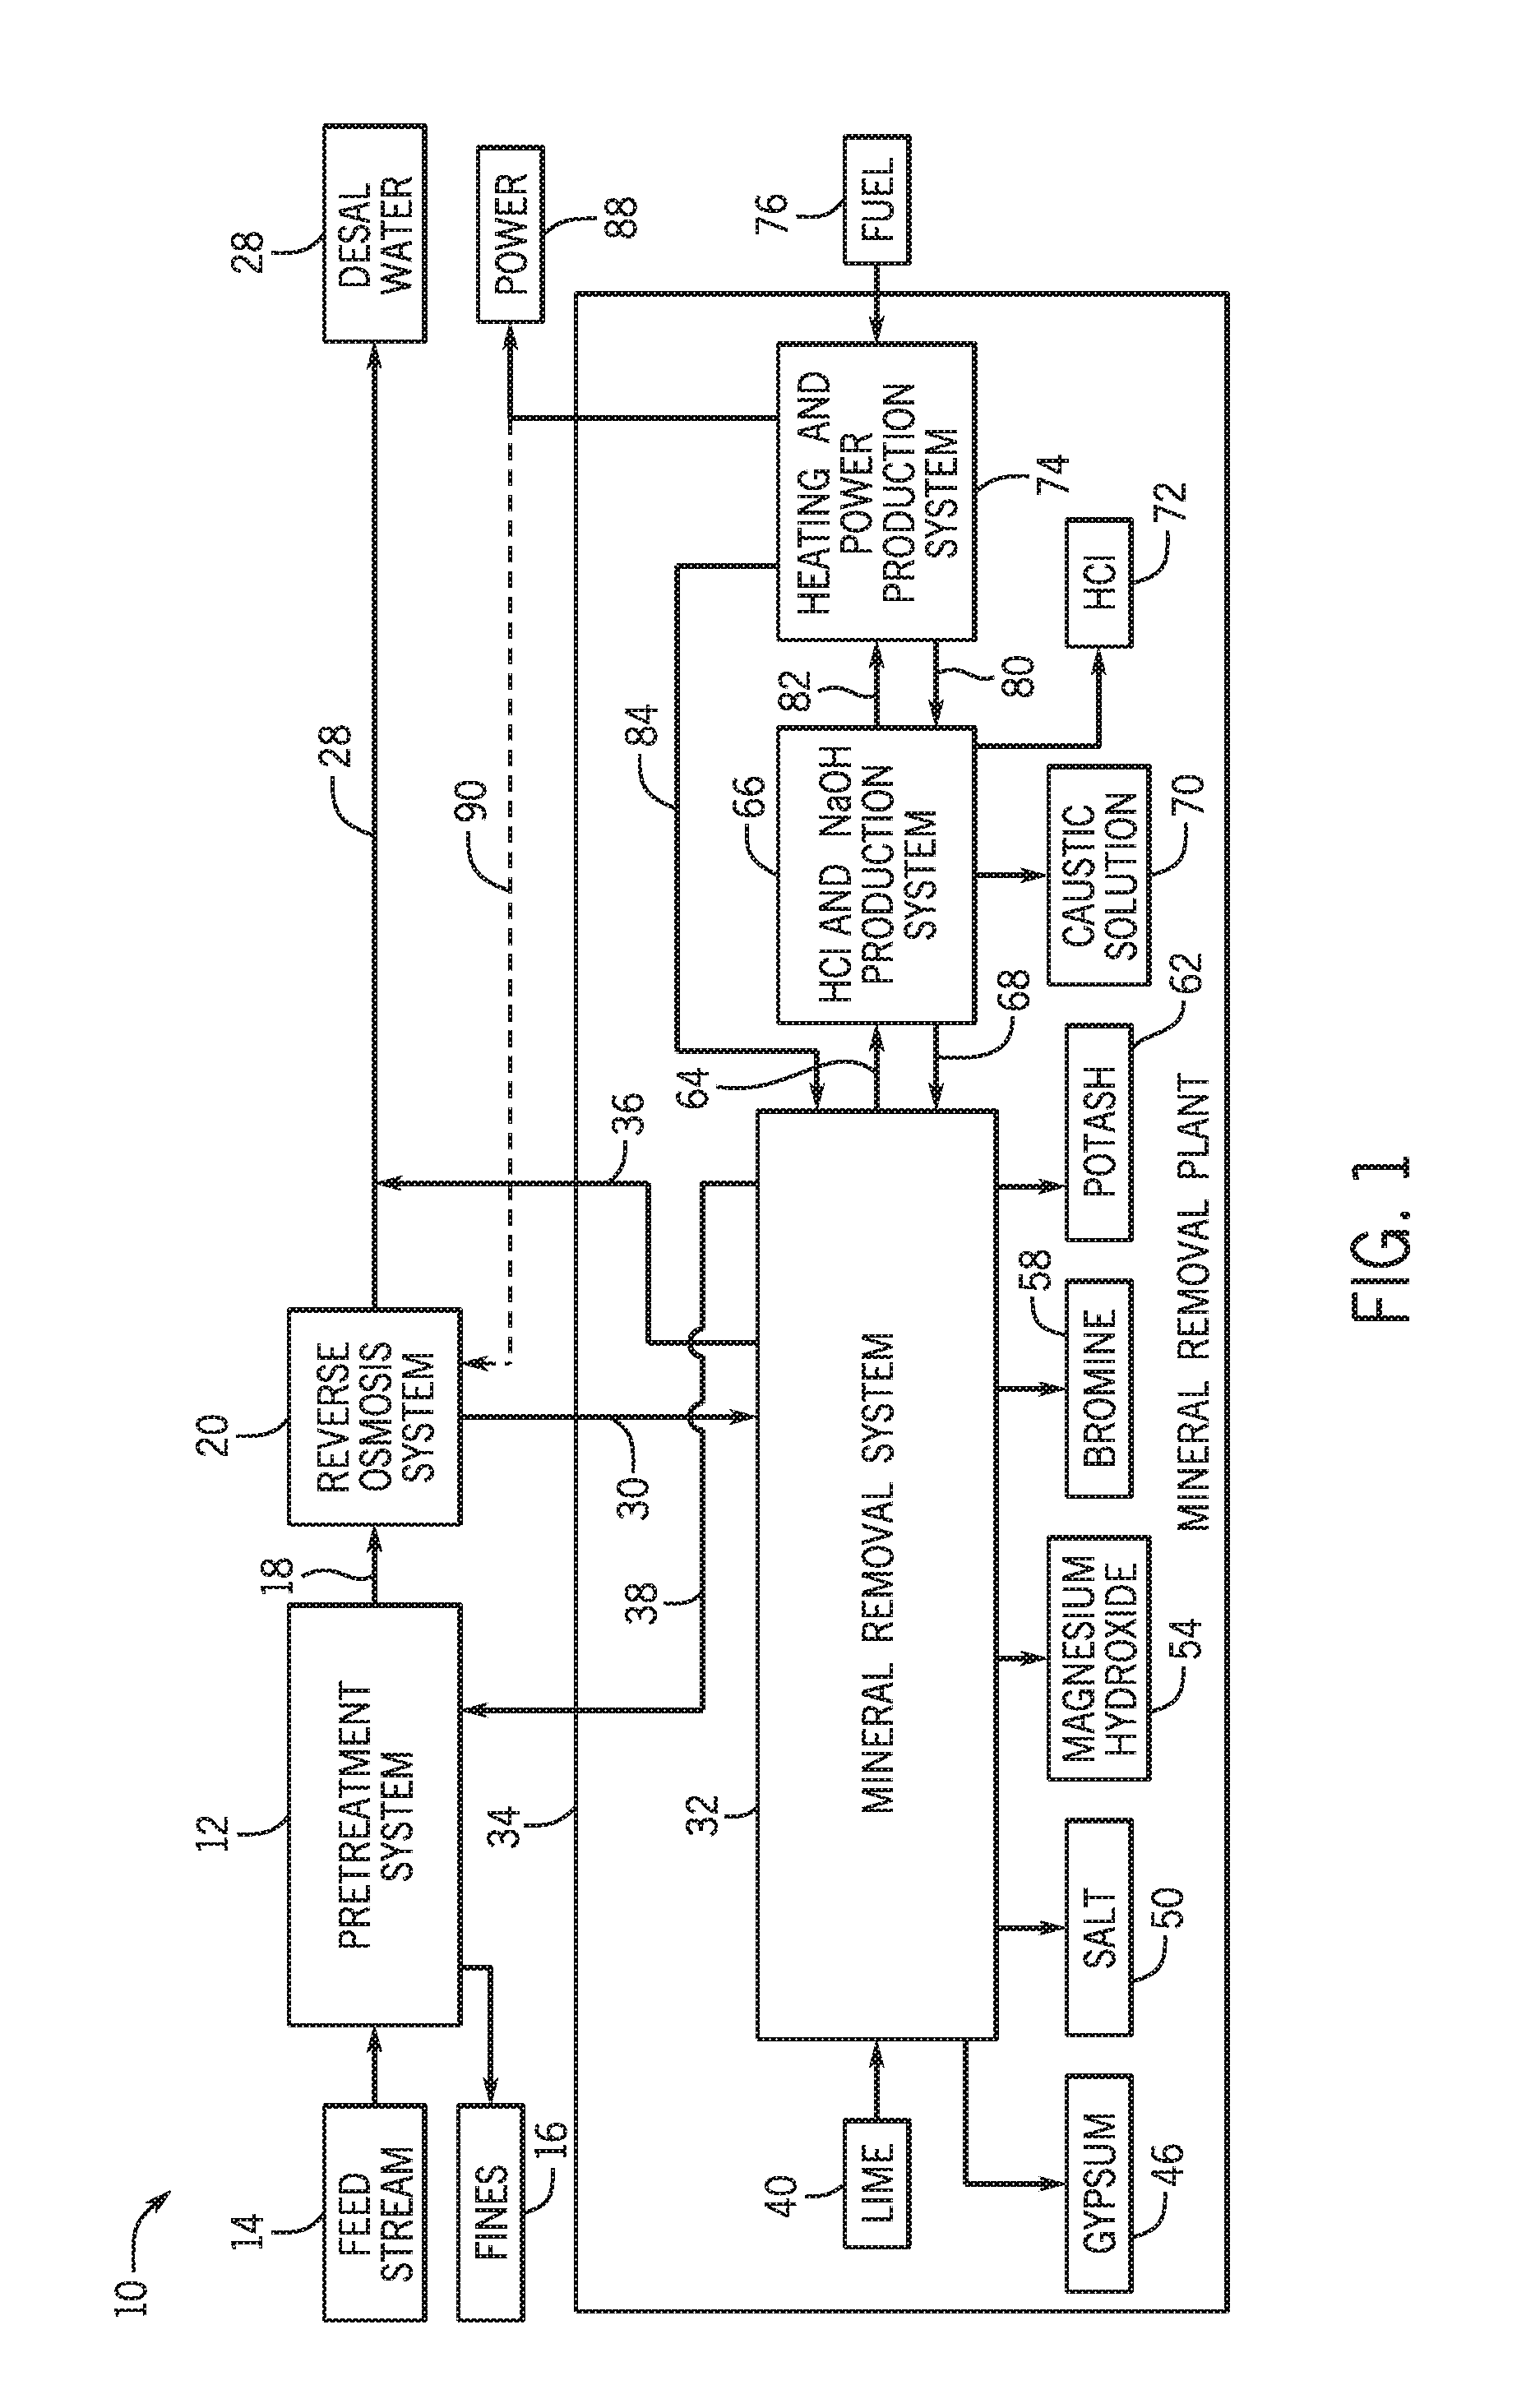 System and methods for removing minerals from a brine using electrodialysis